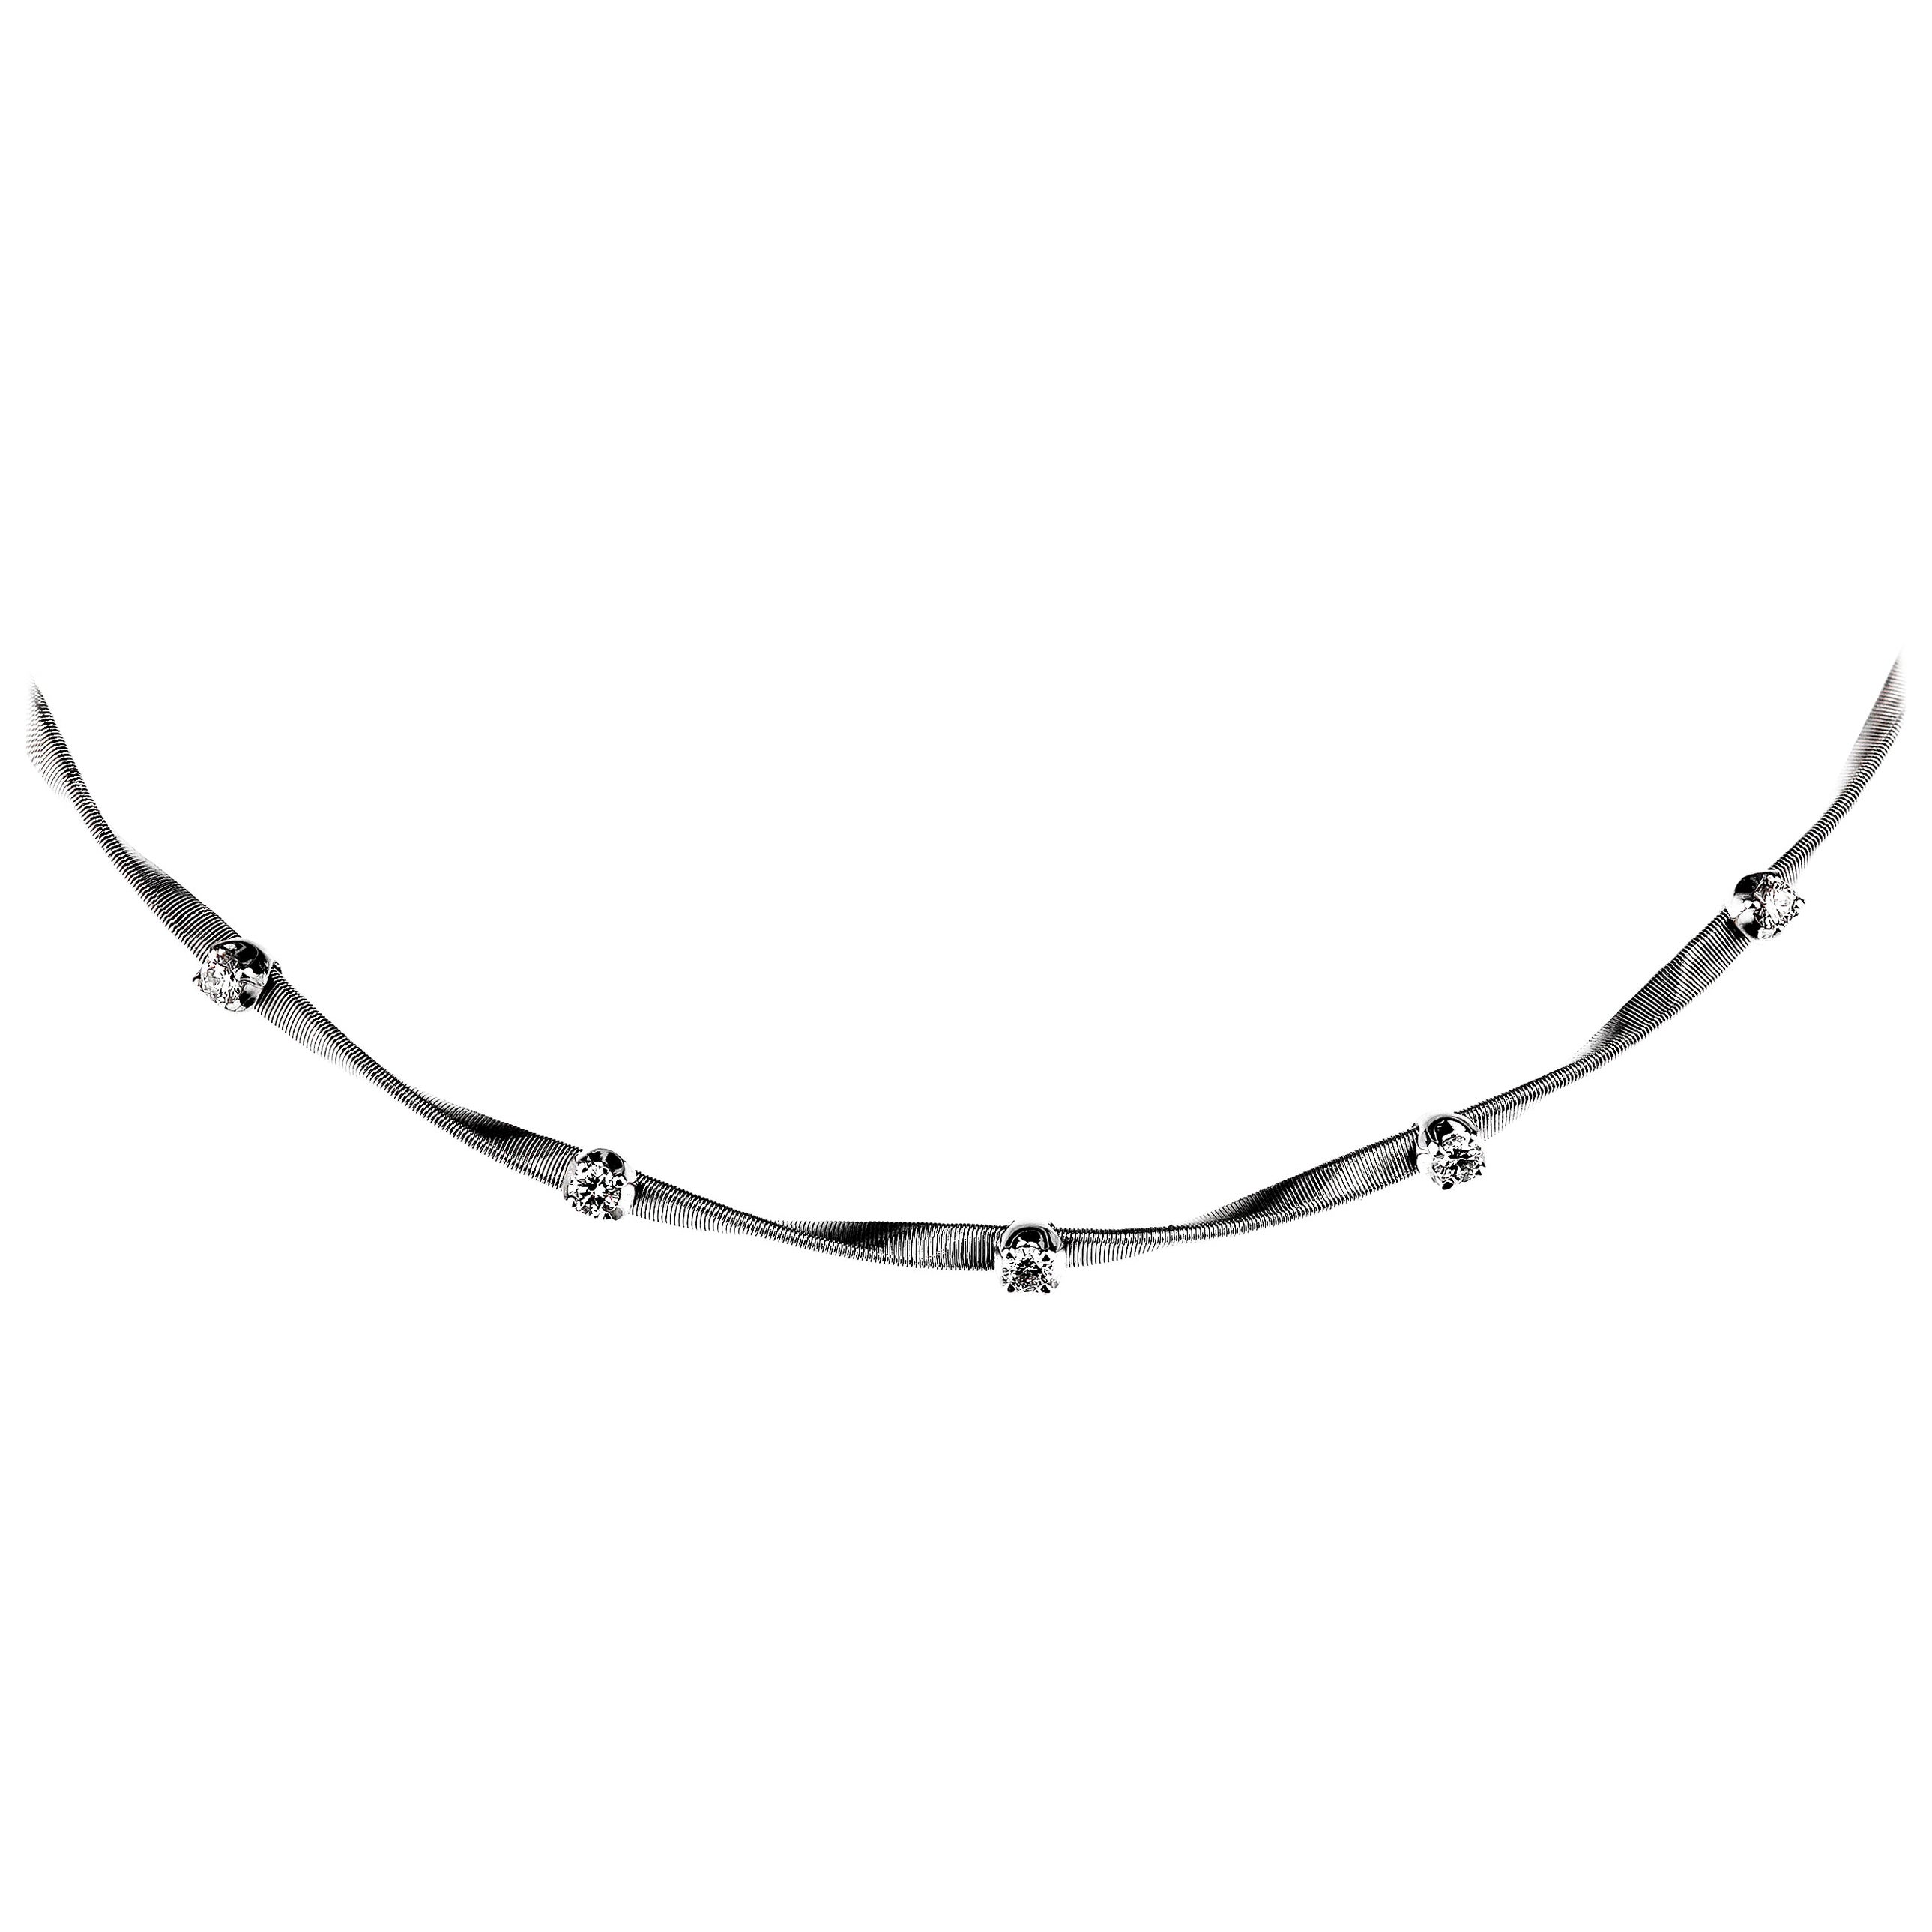 Marco Bicego “Marrakech” Diamond Necklace in 18 Carat White Gold